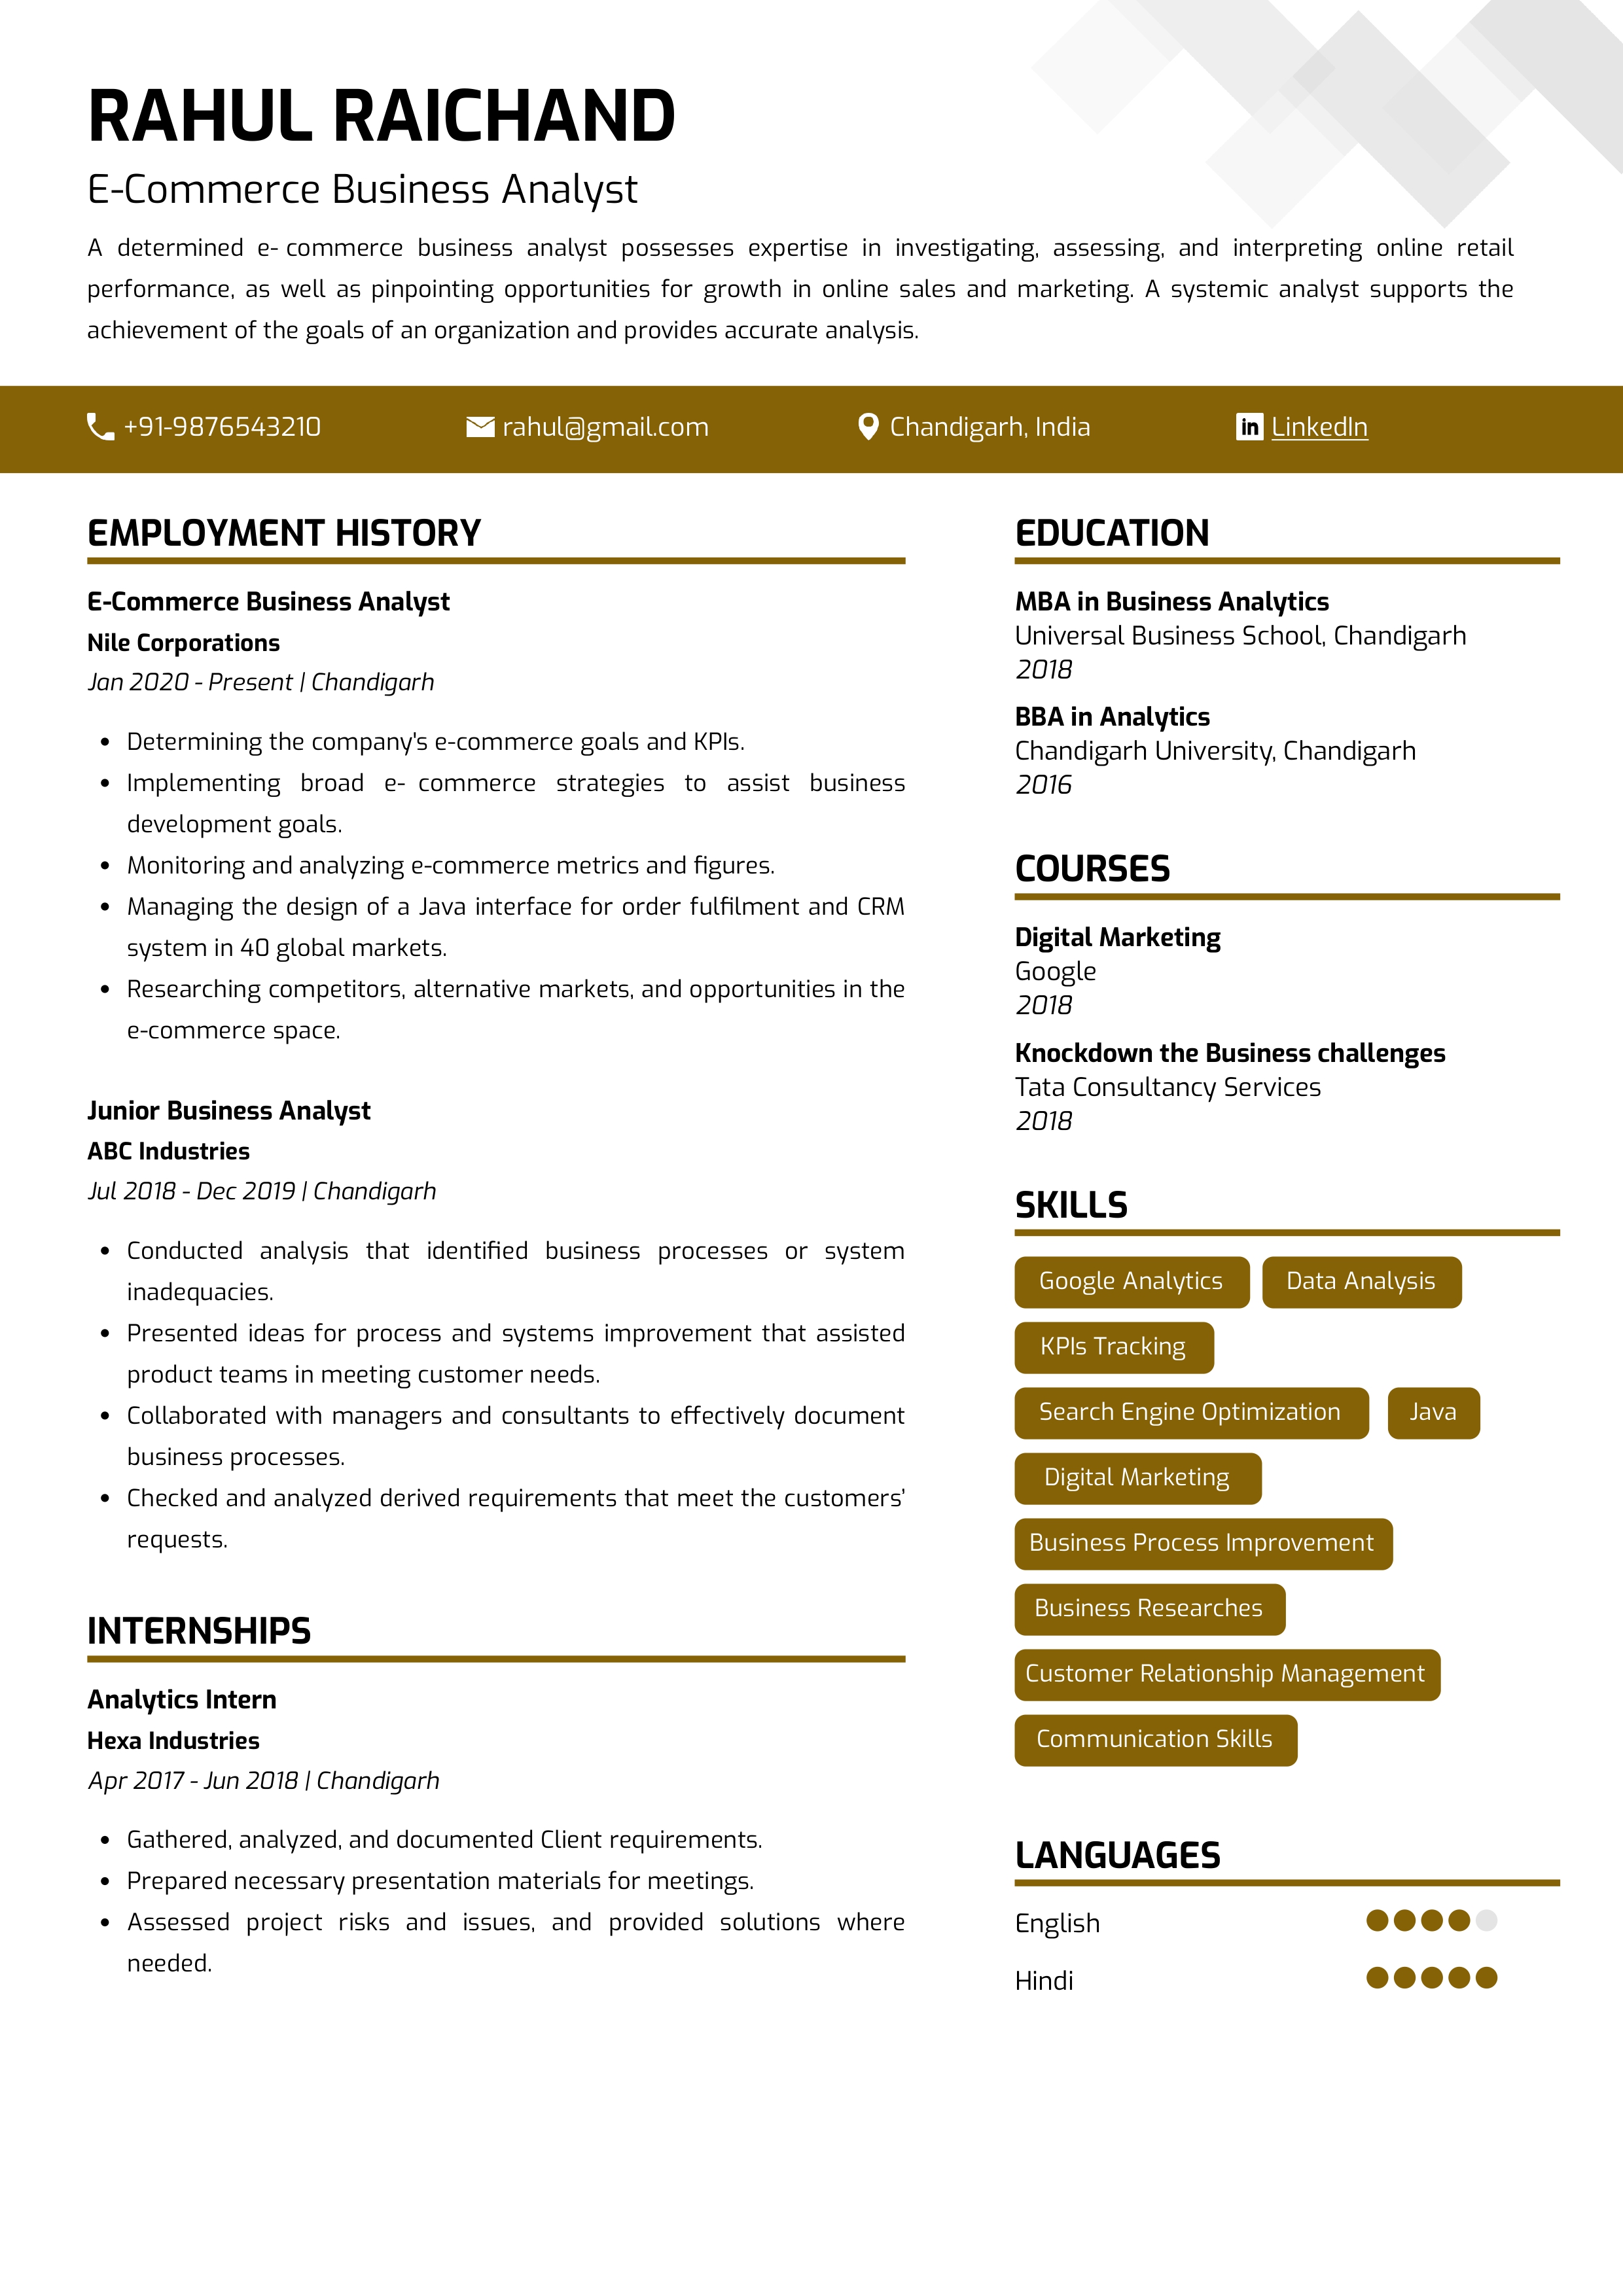 Sample Resume of E-Commerce Business Analyst | Free Resume Templates & Samples on Resumod.co